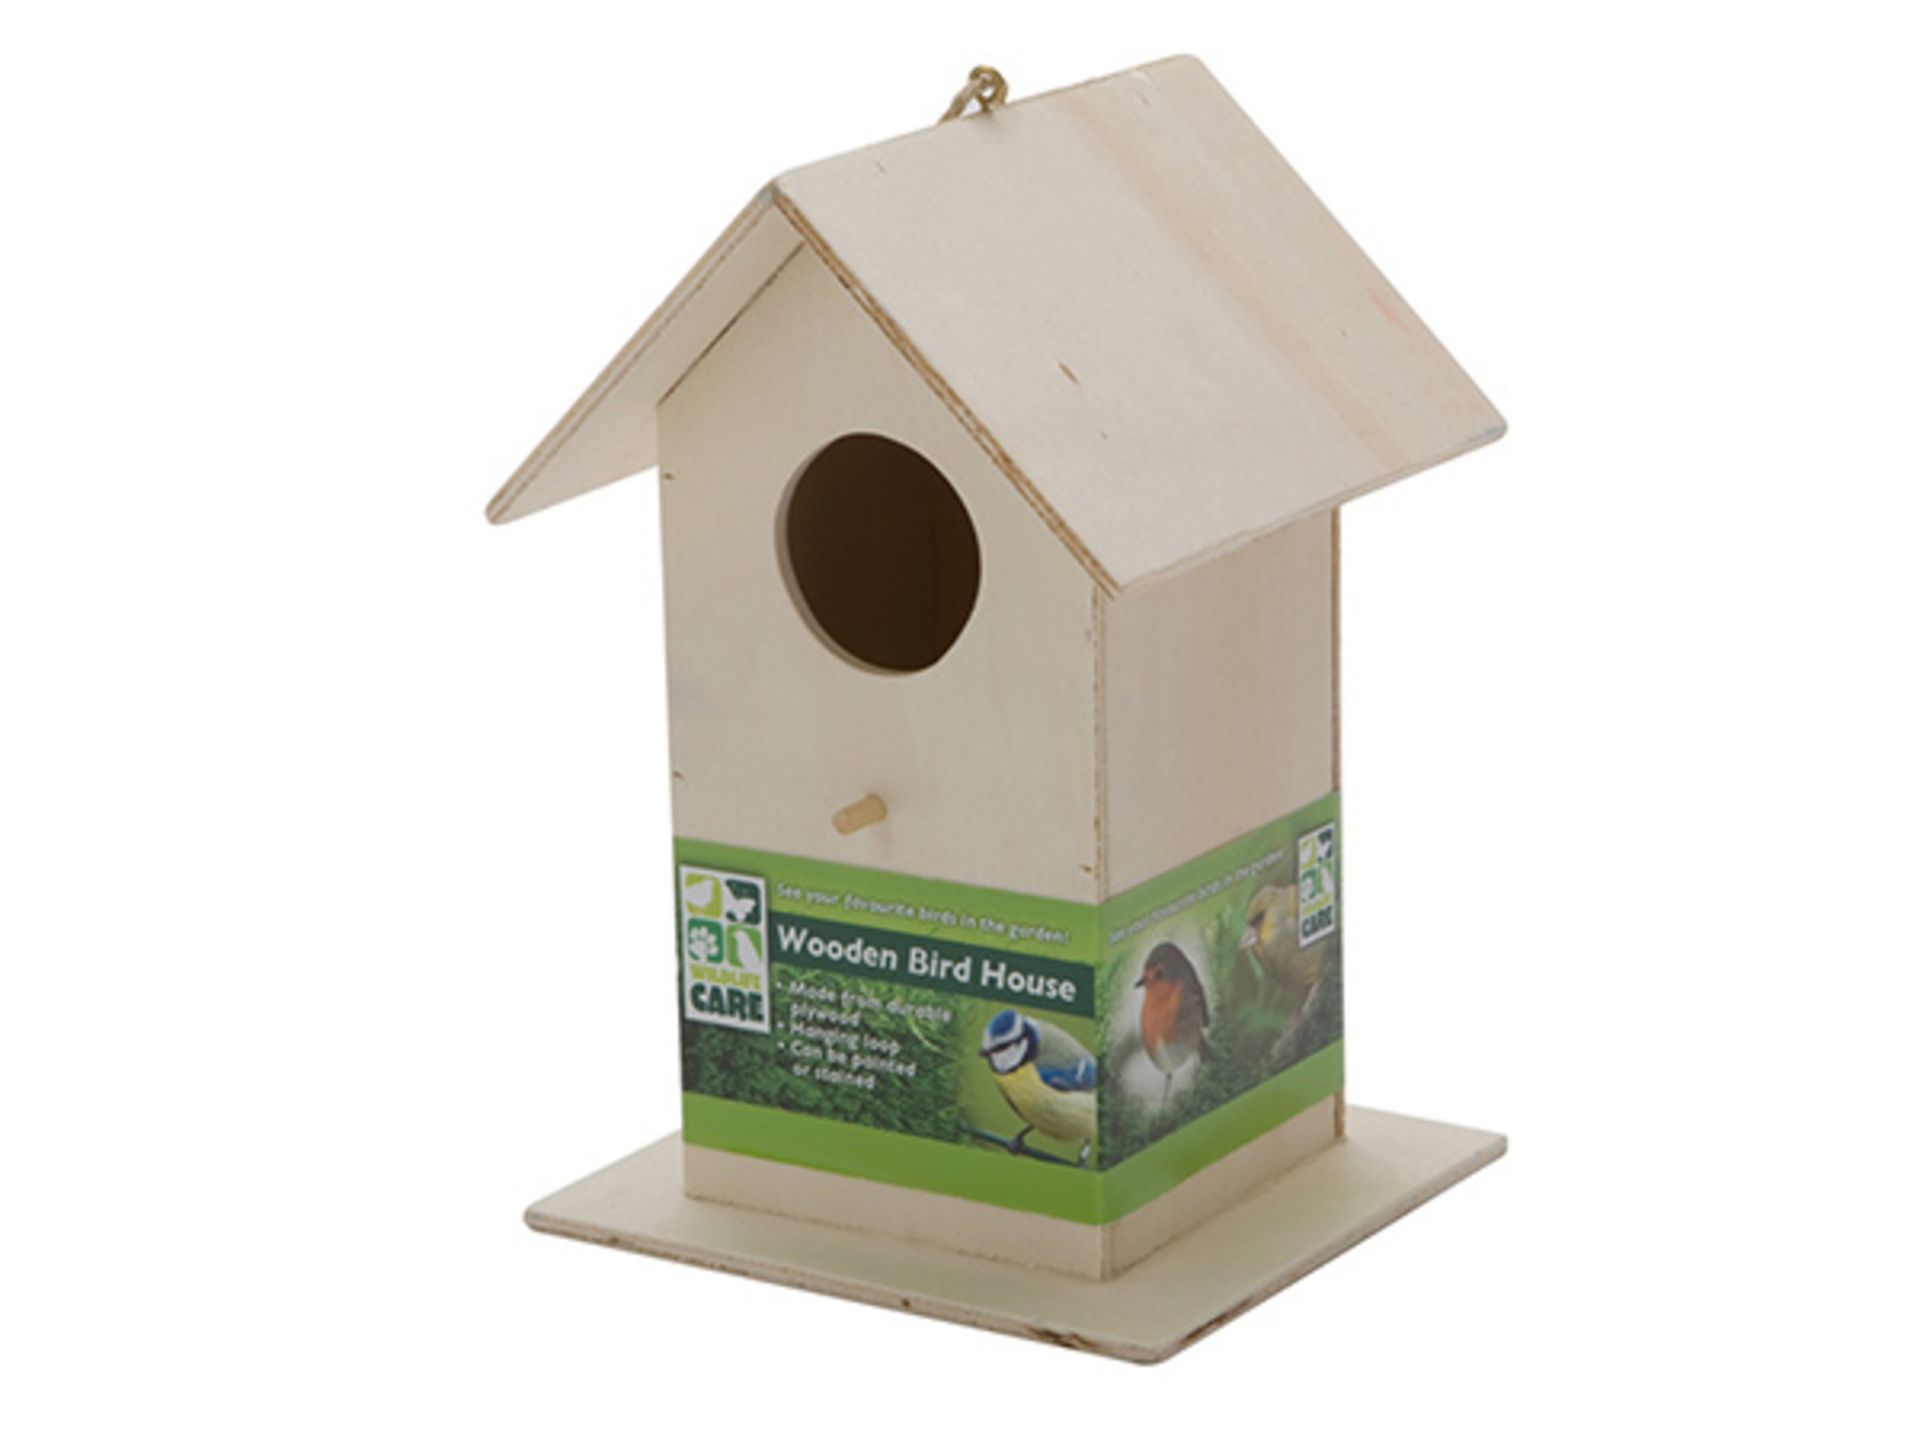 V Brand New Wooden Bird House With Hanging Or Hook Mounting Fixing 18 x 8 cm X 2 YOUR BID PRICE TO